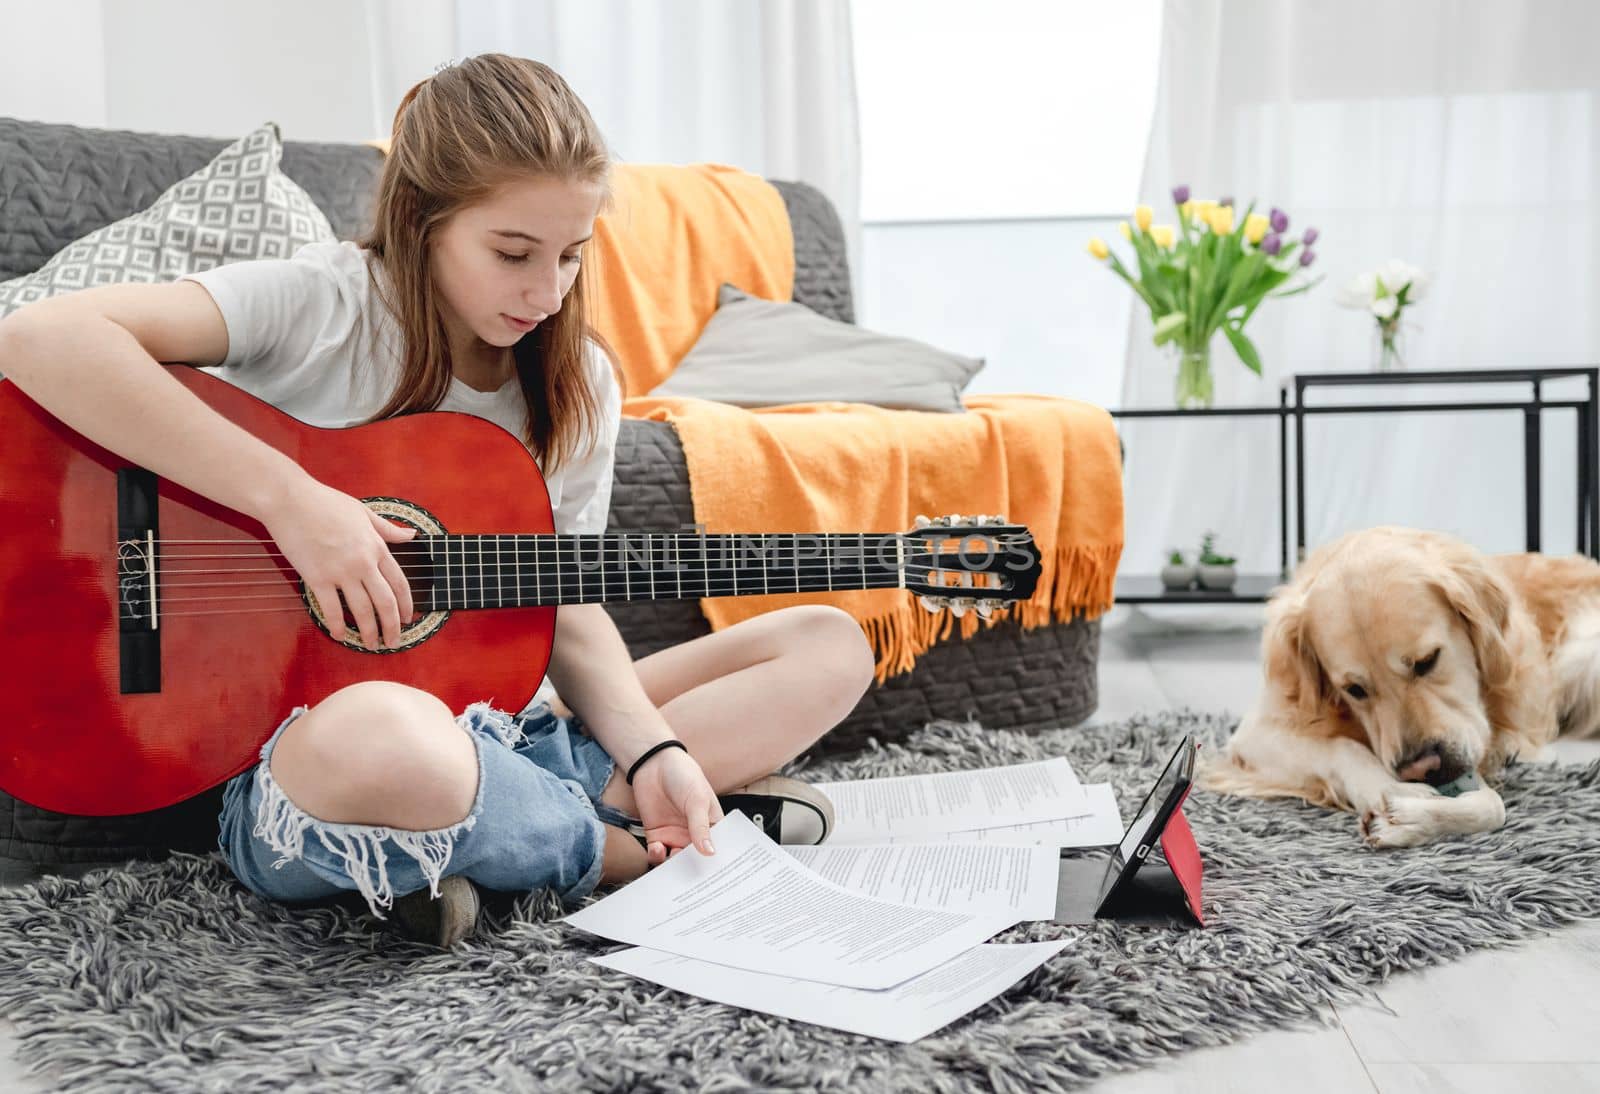 Girl teenager practicing guitar playing with golden retriever dog next to her at home sitting on floor. Pretty guitarist with musician instrument and purebred pet doggy